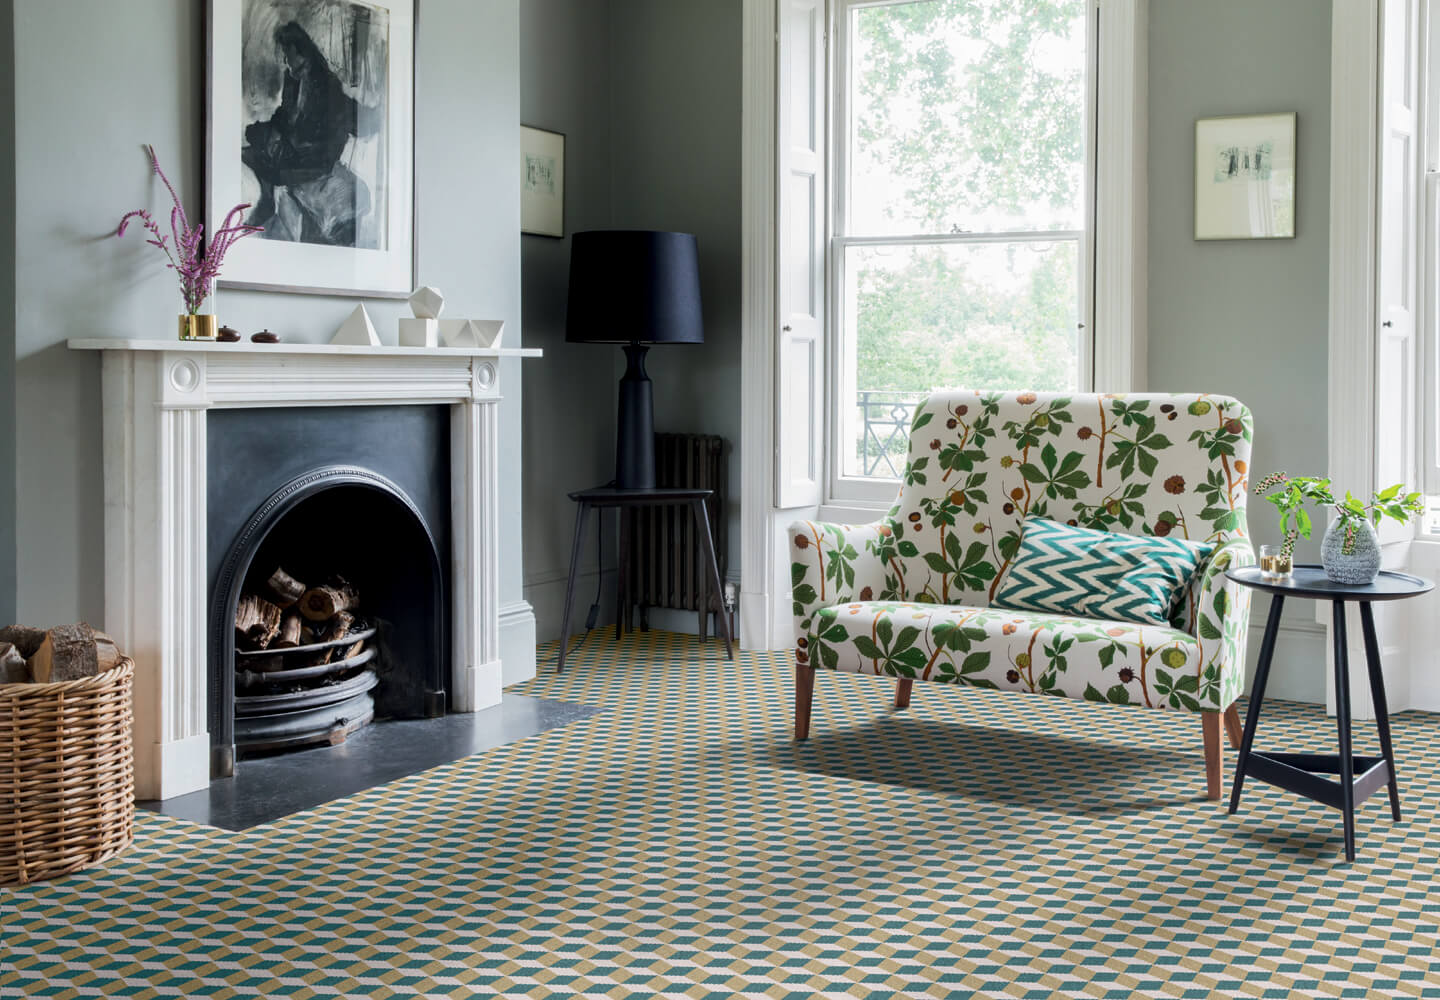 Quirky Cube Soane British patterned carpet designed by Ben Pentreath